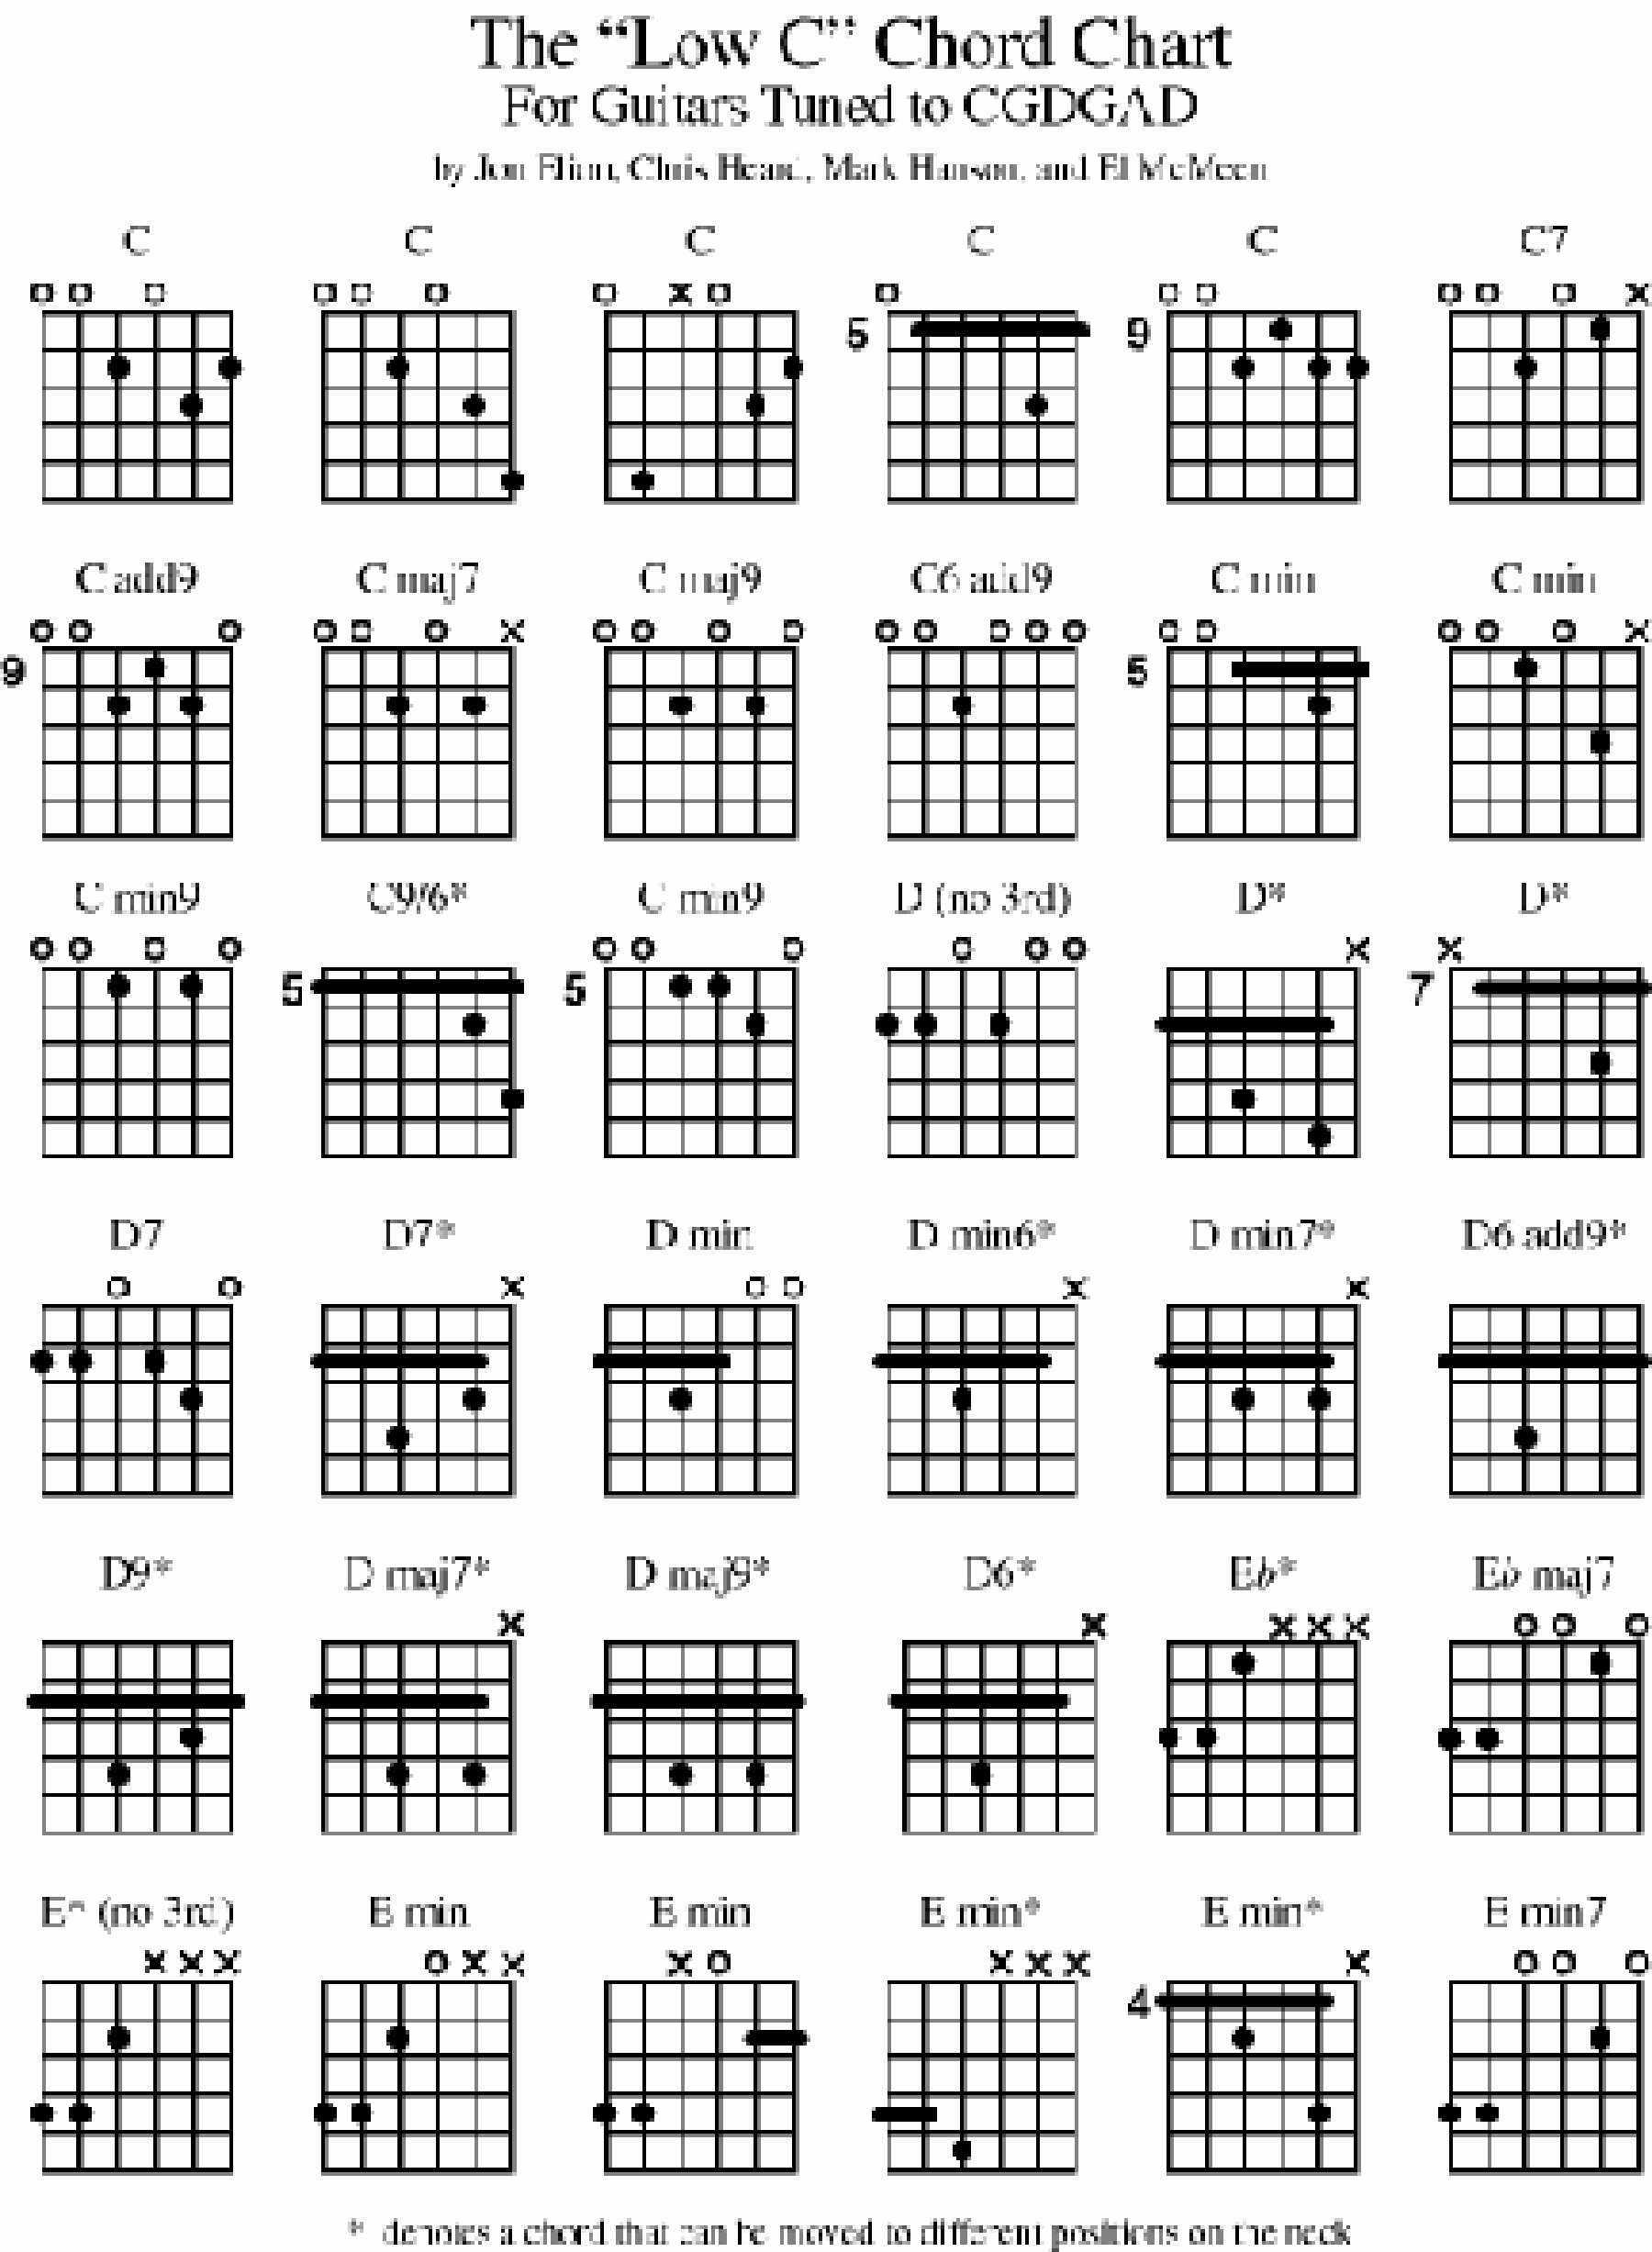 Acoustic Guitar Notes Chart Inspirational Open C Tuning the Acoustic Guitar forum